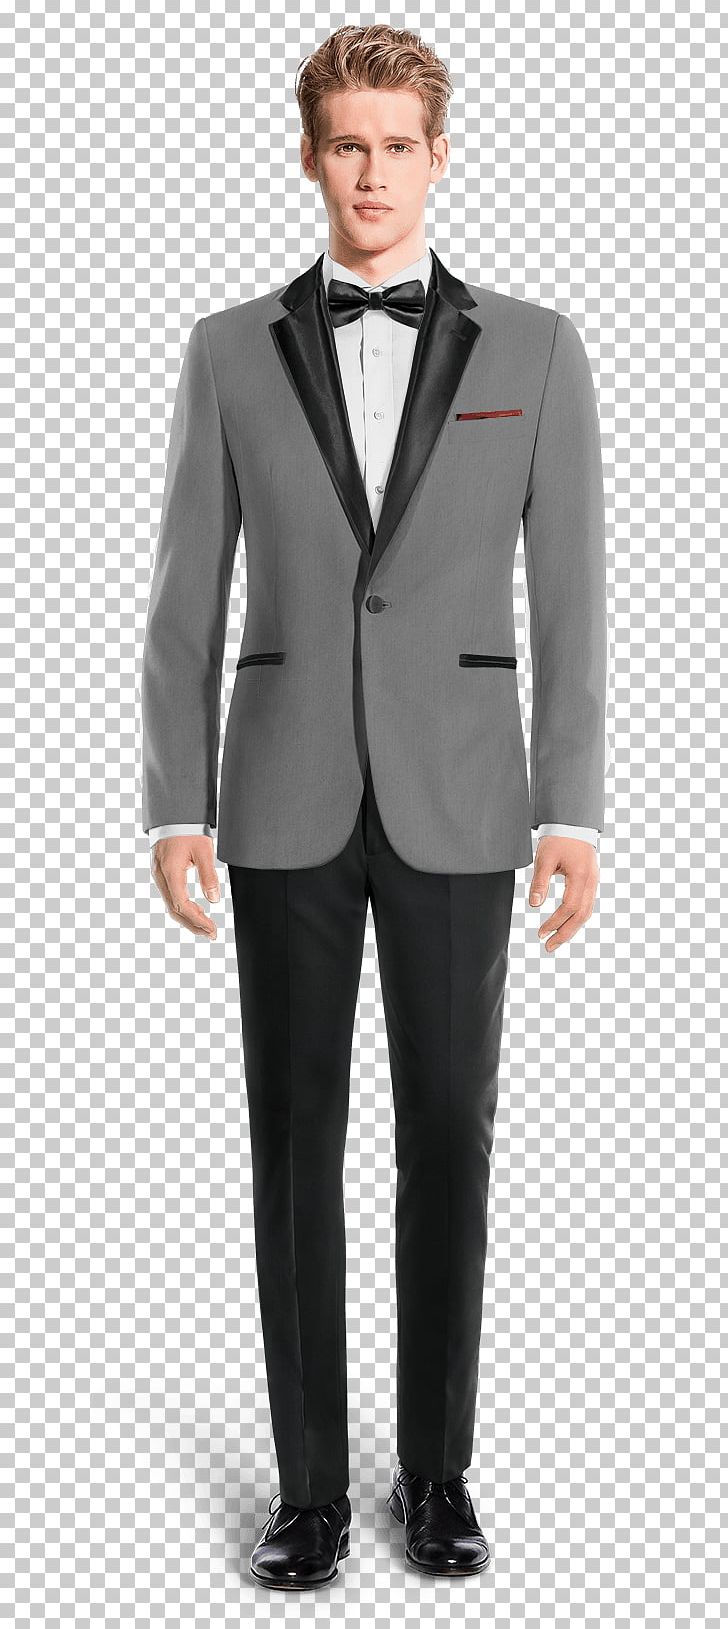 Suit Pants Tweed Double-breasted Tuxedo PNG, Clipart, Beige, Blazer, Blue, Businessperson, Chino Cloth Free PNG Download